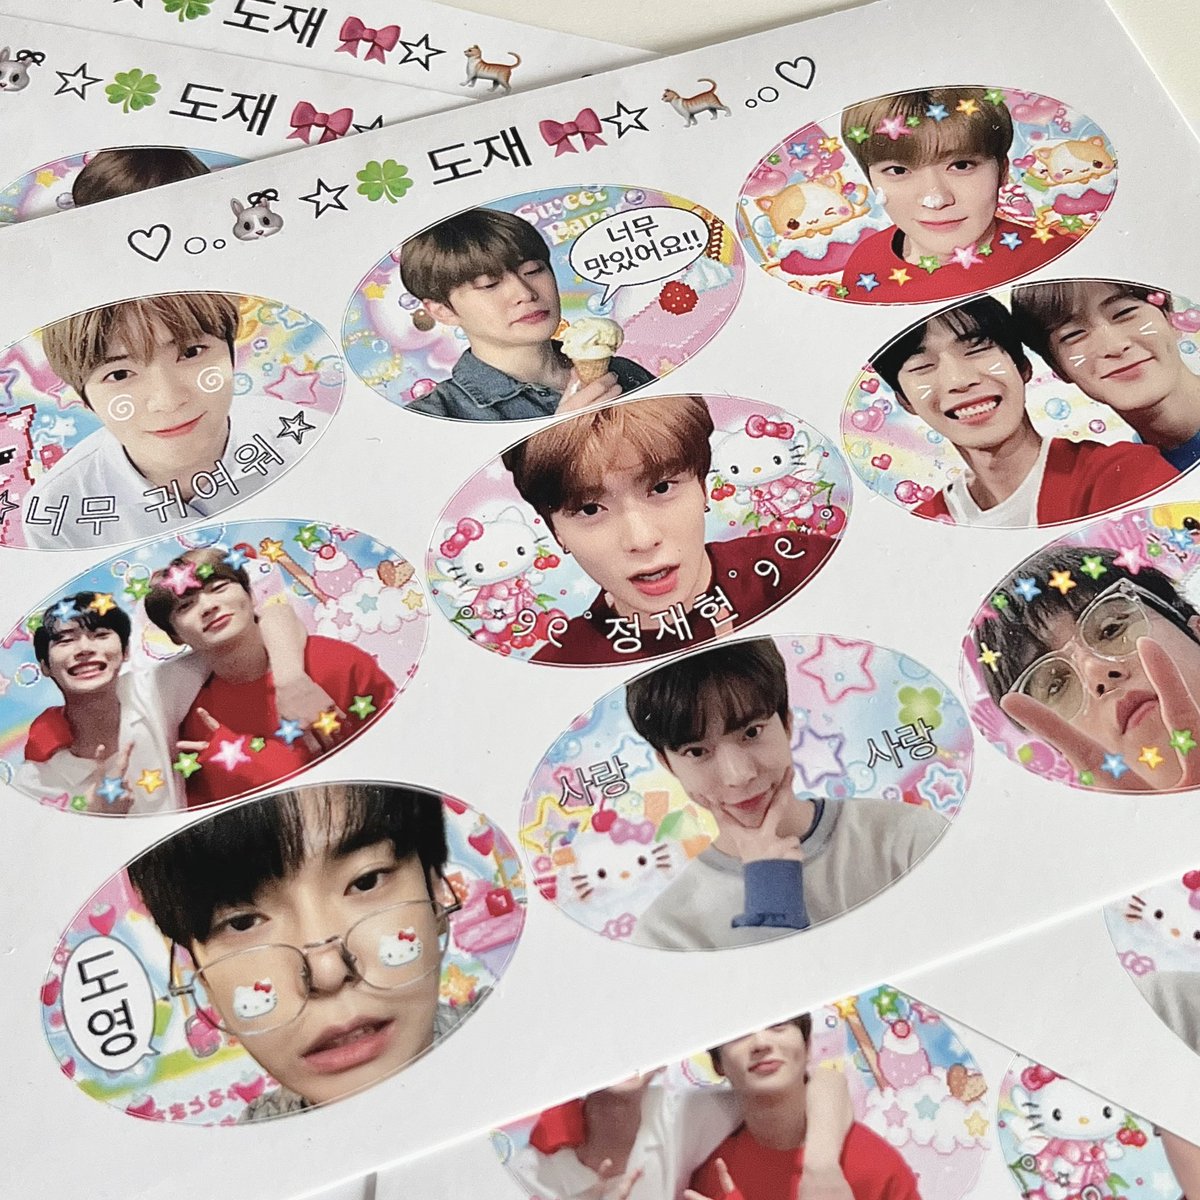 ♥︎꒰ giveaway doyoung & jaehyun ꒱♥︎

for rt only
♡ིྀ only 2ea free shipping🍀

♡ sticker 10 ea
💌time & location: tba

#happydoyoungday 
#happyjaehyunday